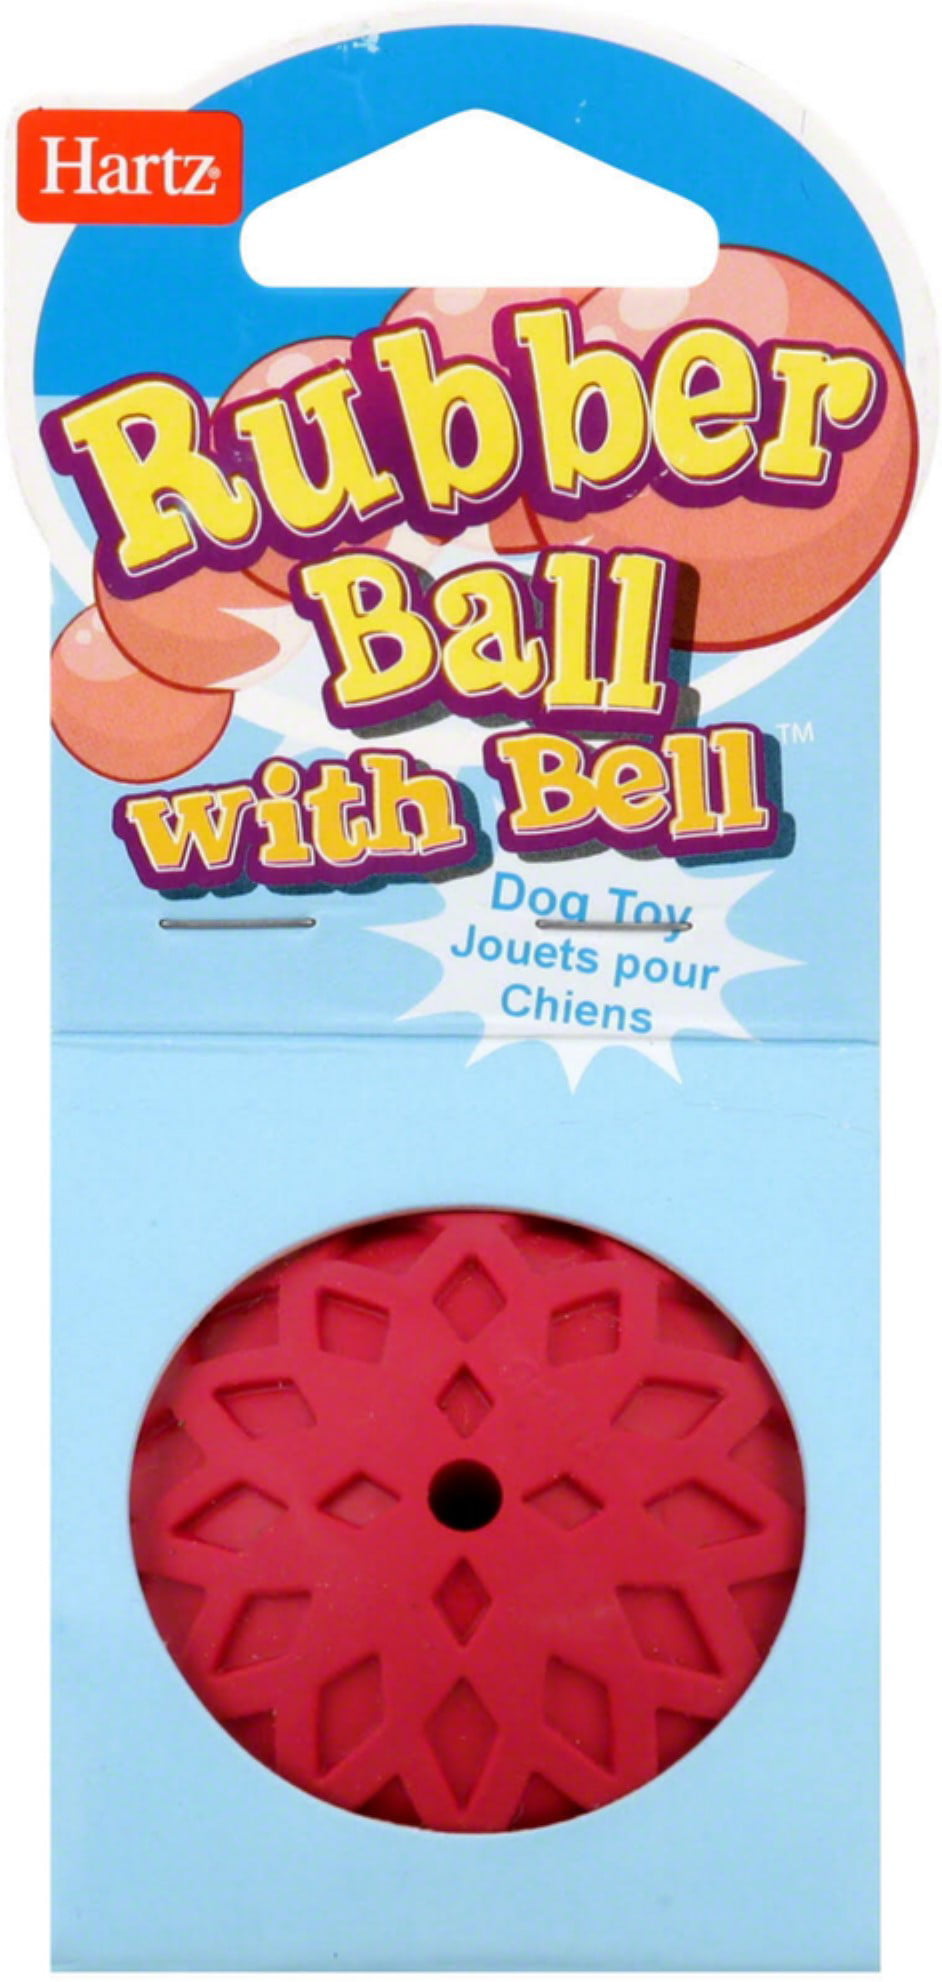 Pack of 9 Hartz Rubber Ball with Bell for Tiny Dogs 1 ea 